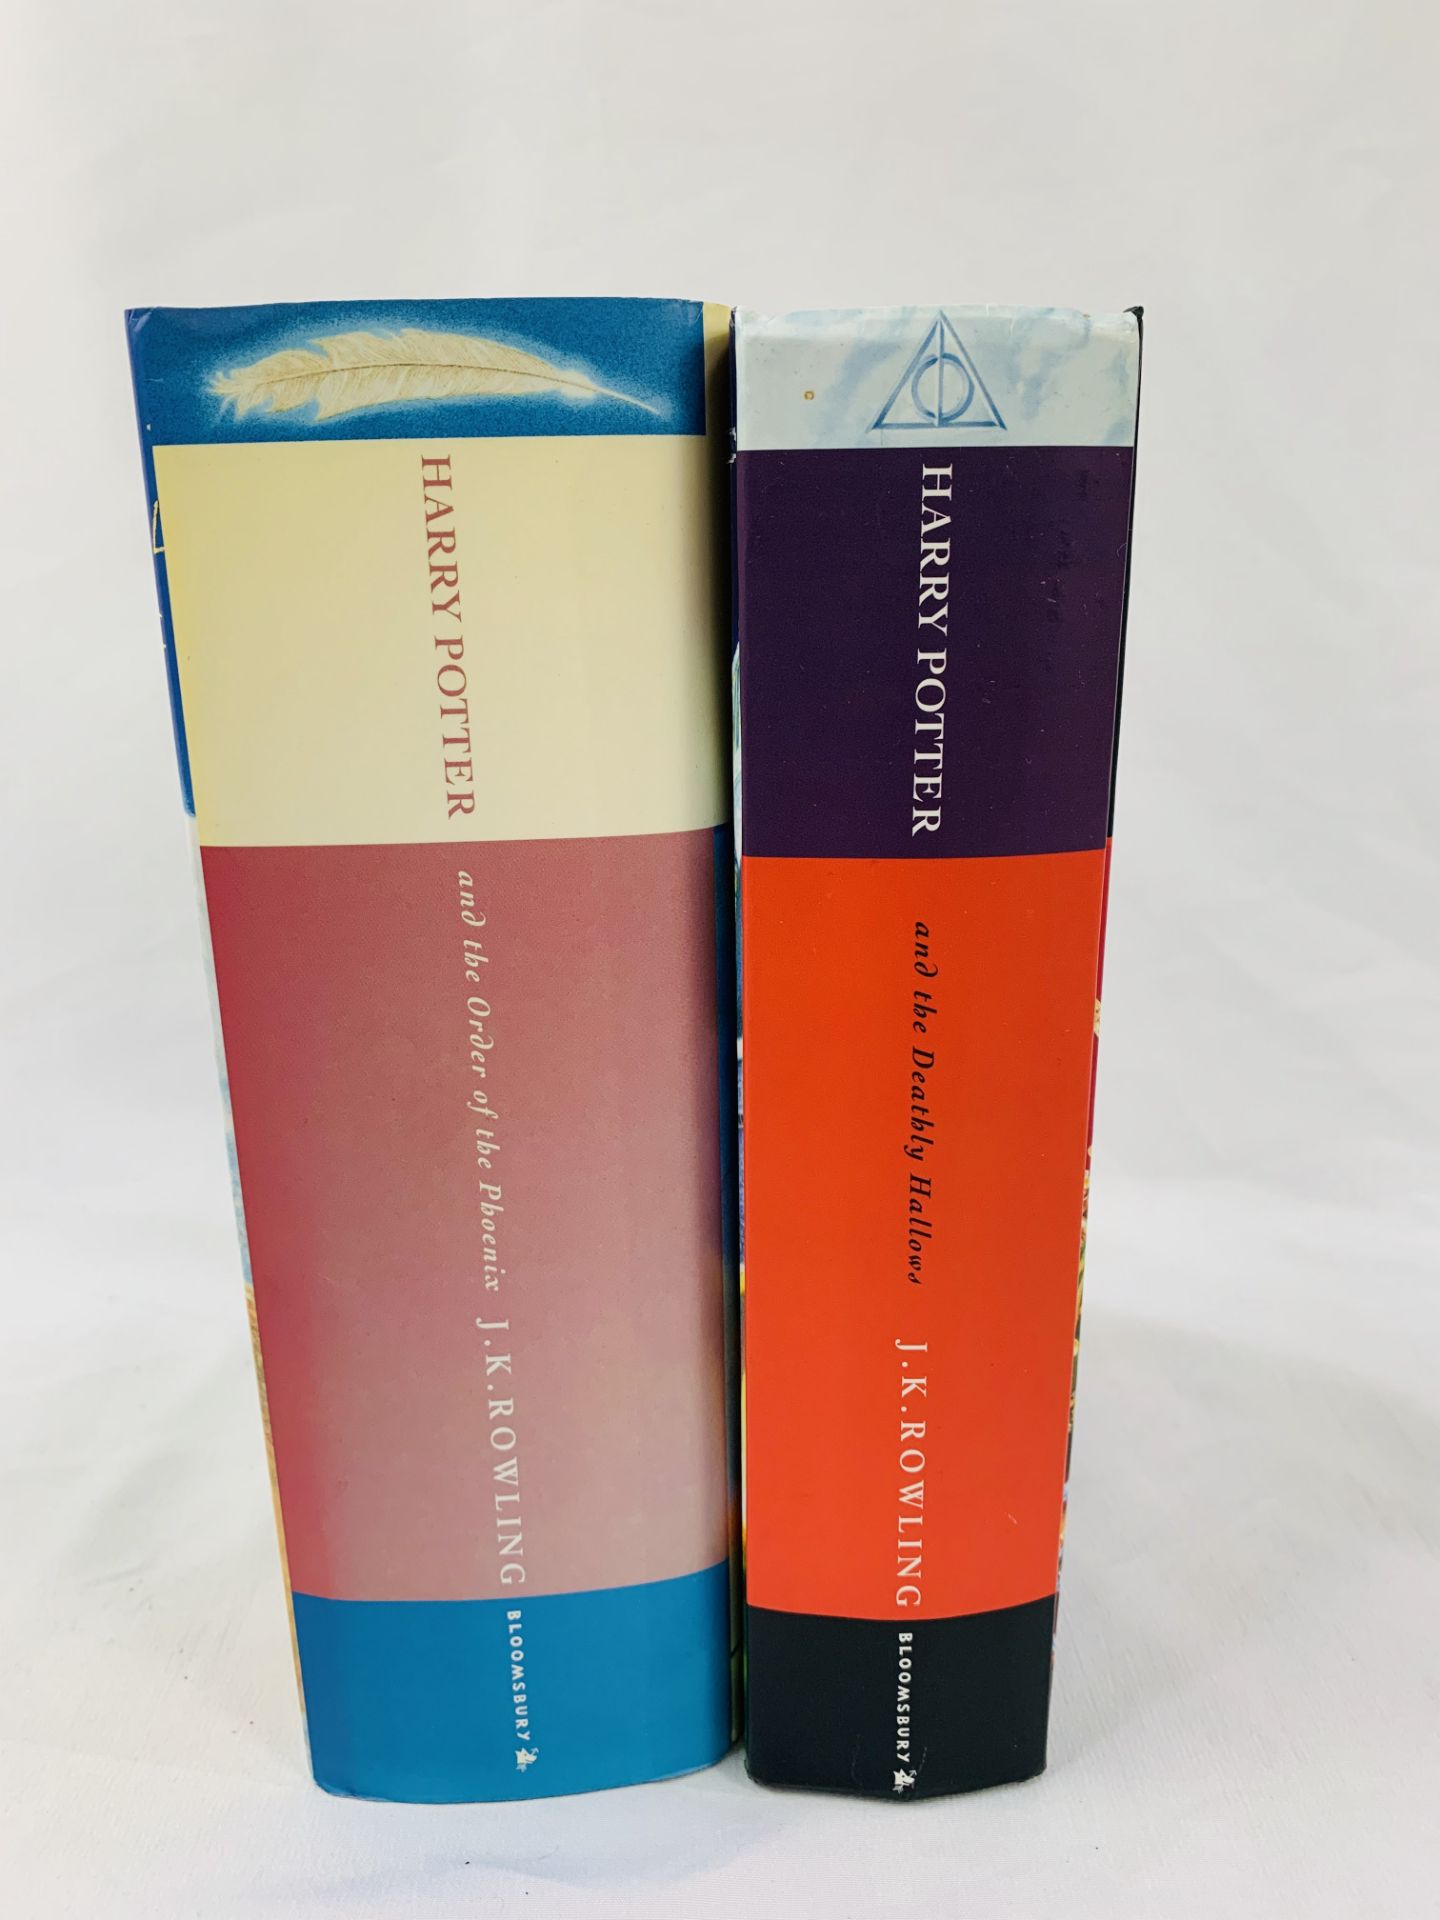 2 Harry Potter hard back first editions "The Order of the Phoenix" and "The Deathly Hallows". - Image 2 of 2